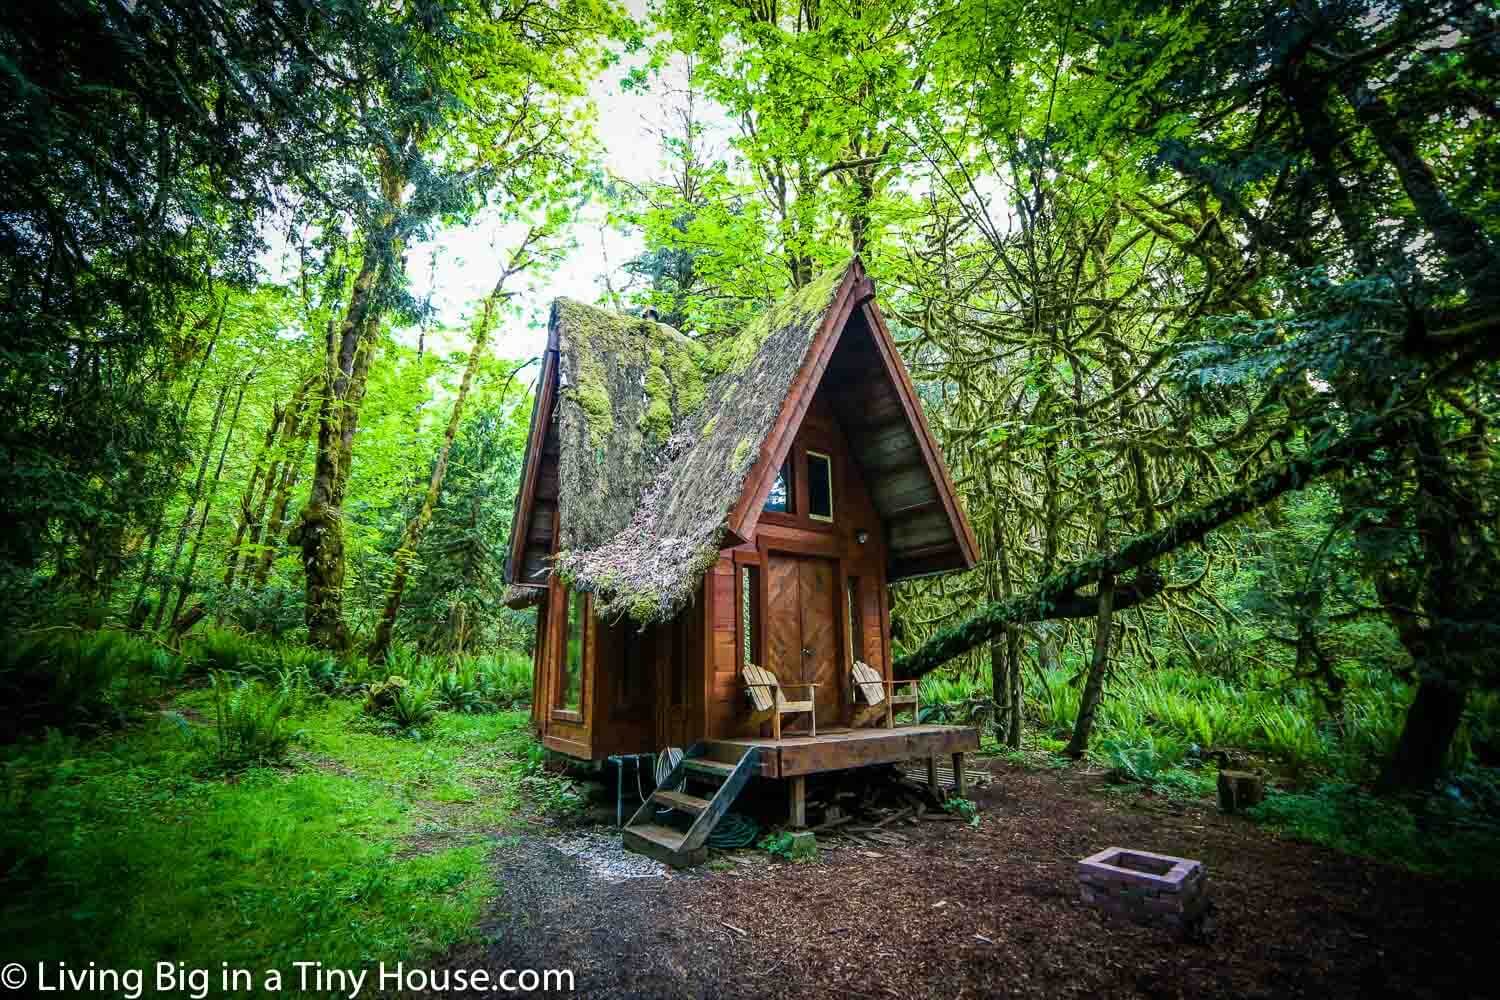 Living Big in a Tiny  House  This Enchanting Cabin in the Forest  Will Leave You Breathless